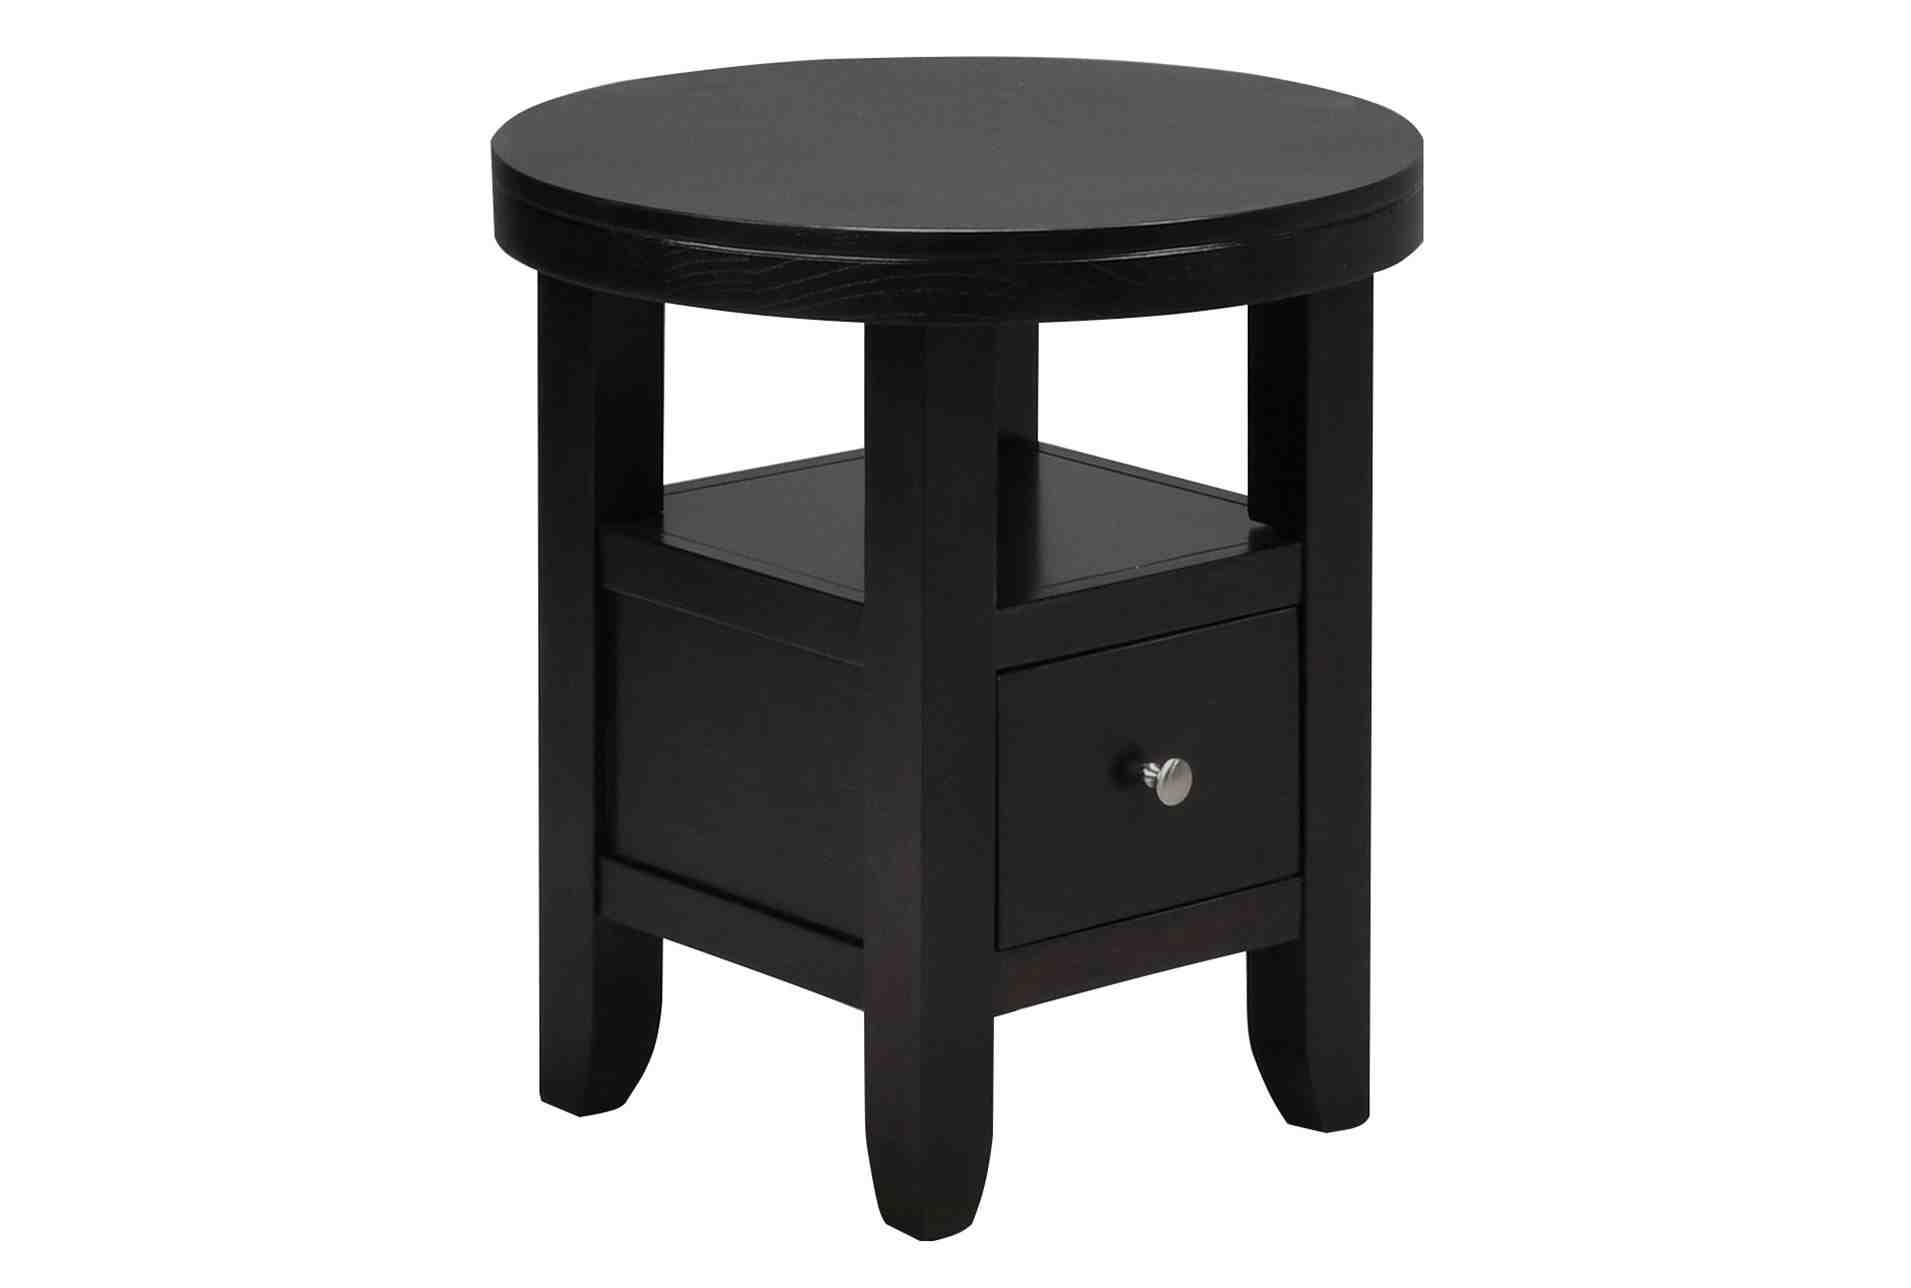 Black Round End Tables For Living Room